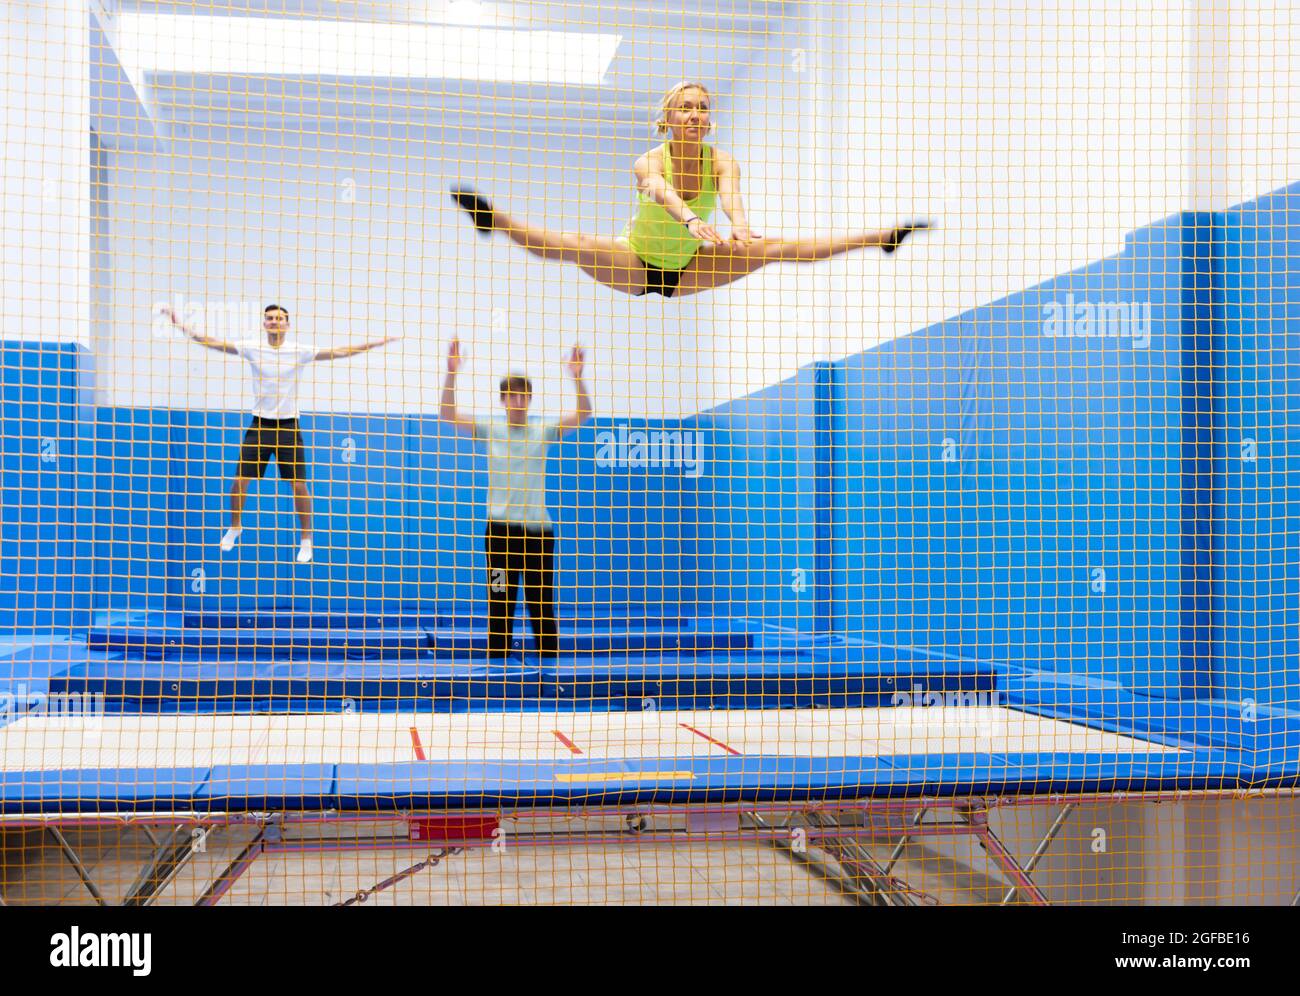 Sporty people exercising on trampoline Stock Photo